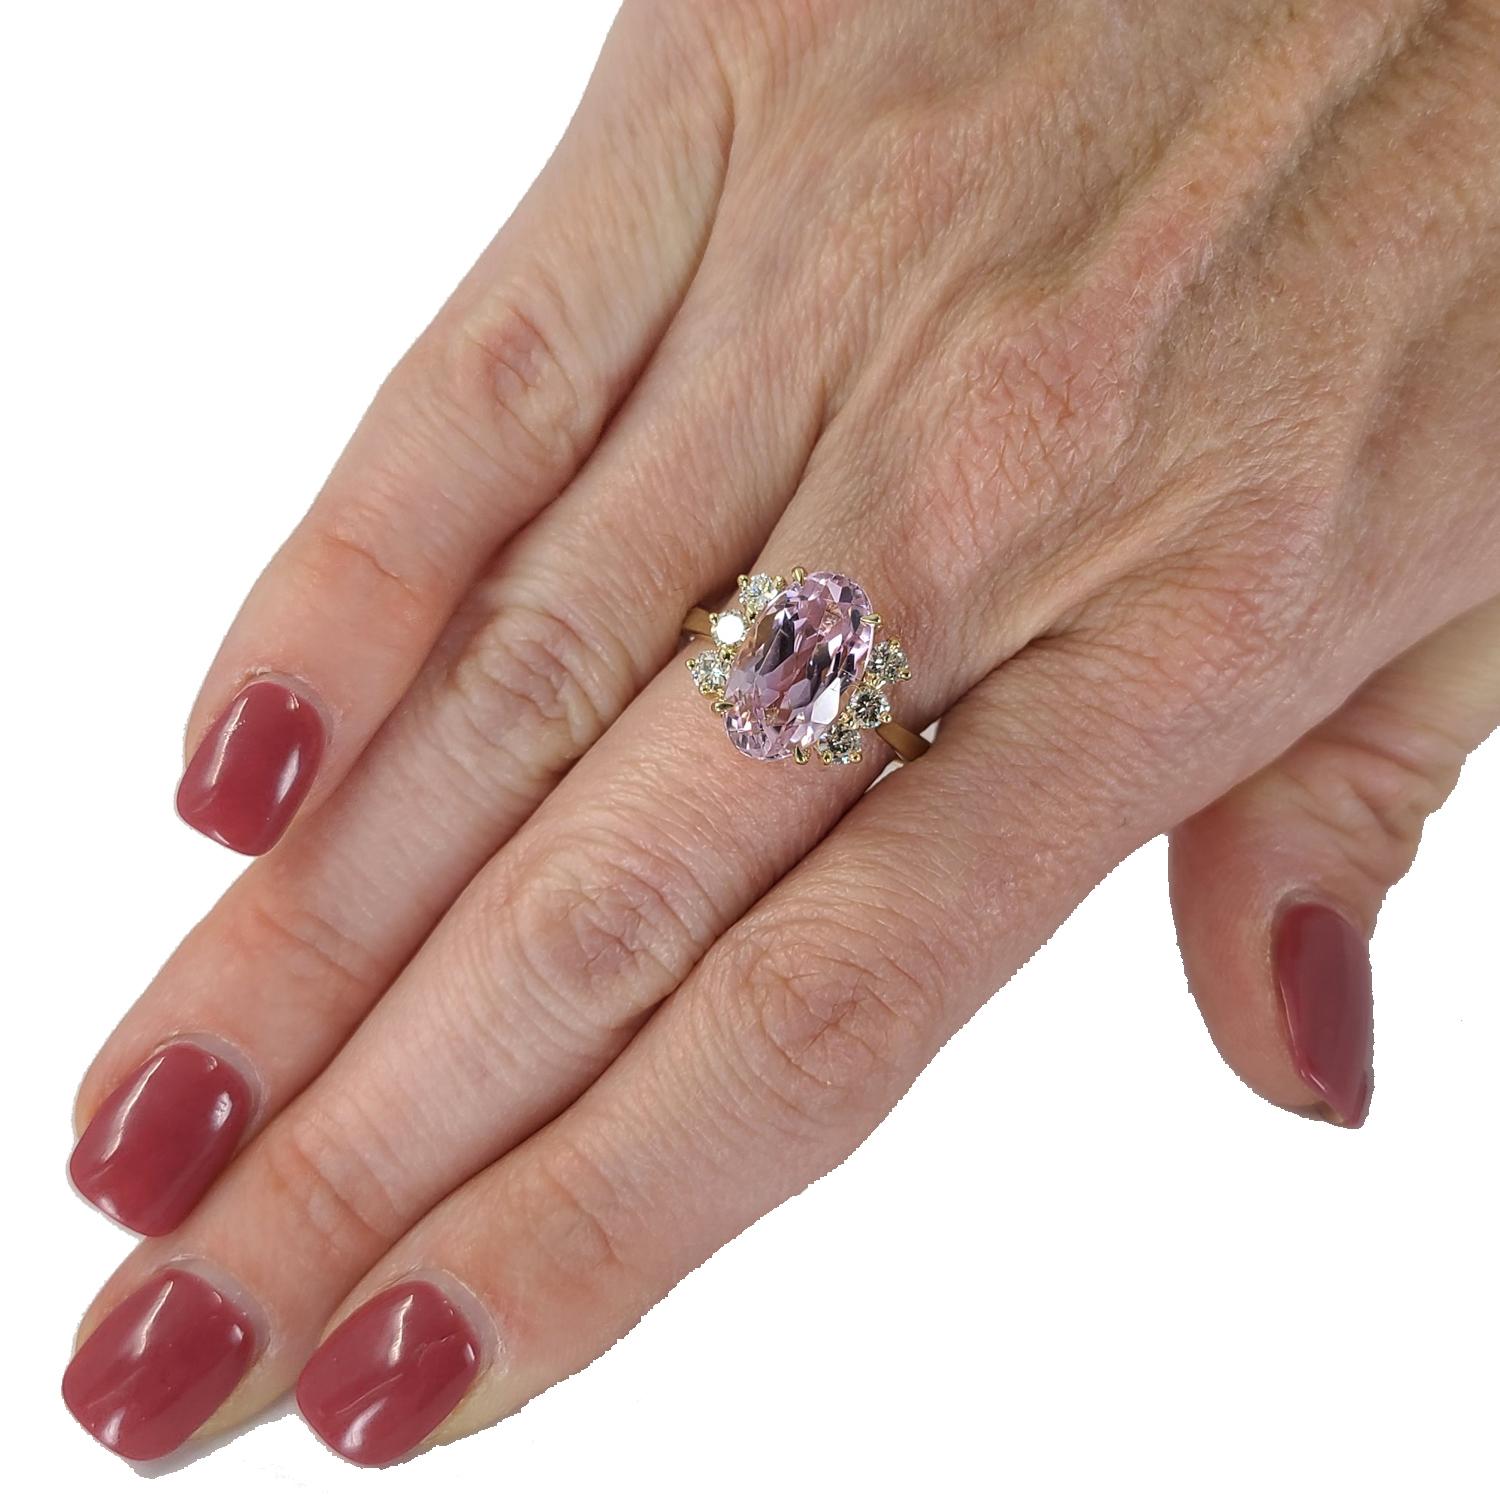 14 Karat Yellow Gold Cocktail Ring Featuring A 5.66 Carat Elongated Oval Kunzite Accented By 6 Round Brilliant Cut Diamonds Of G Color & VS Clarity Totaling 0.45 Carats. Current Finger Size Is 7.25; Purchase Includes One Sizing Upon Request.